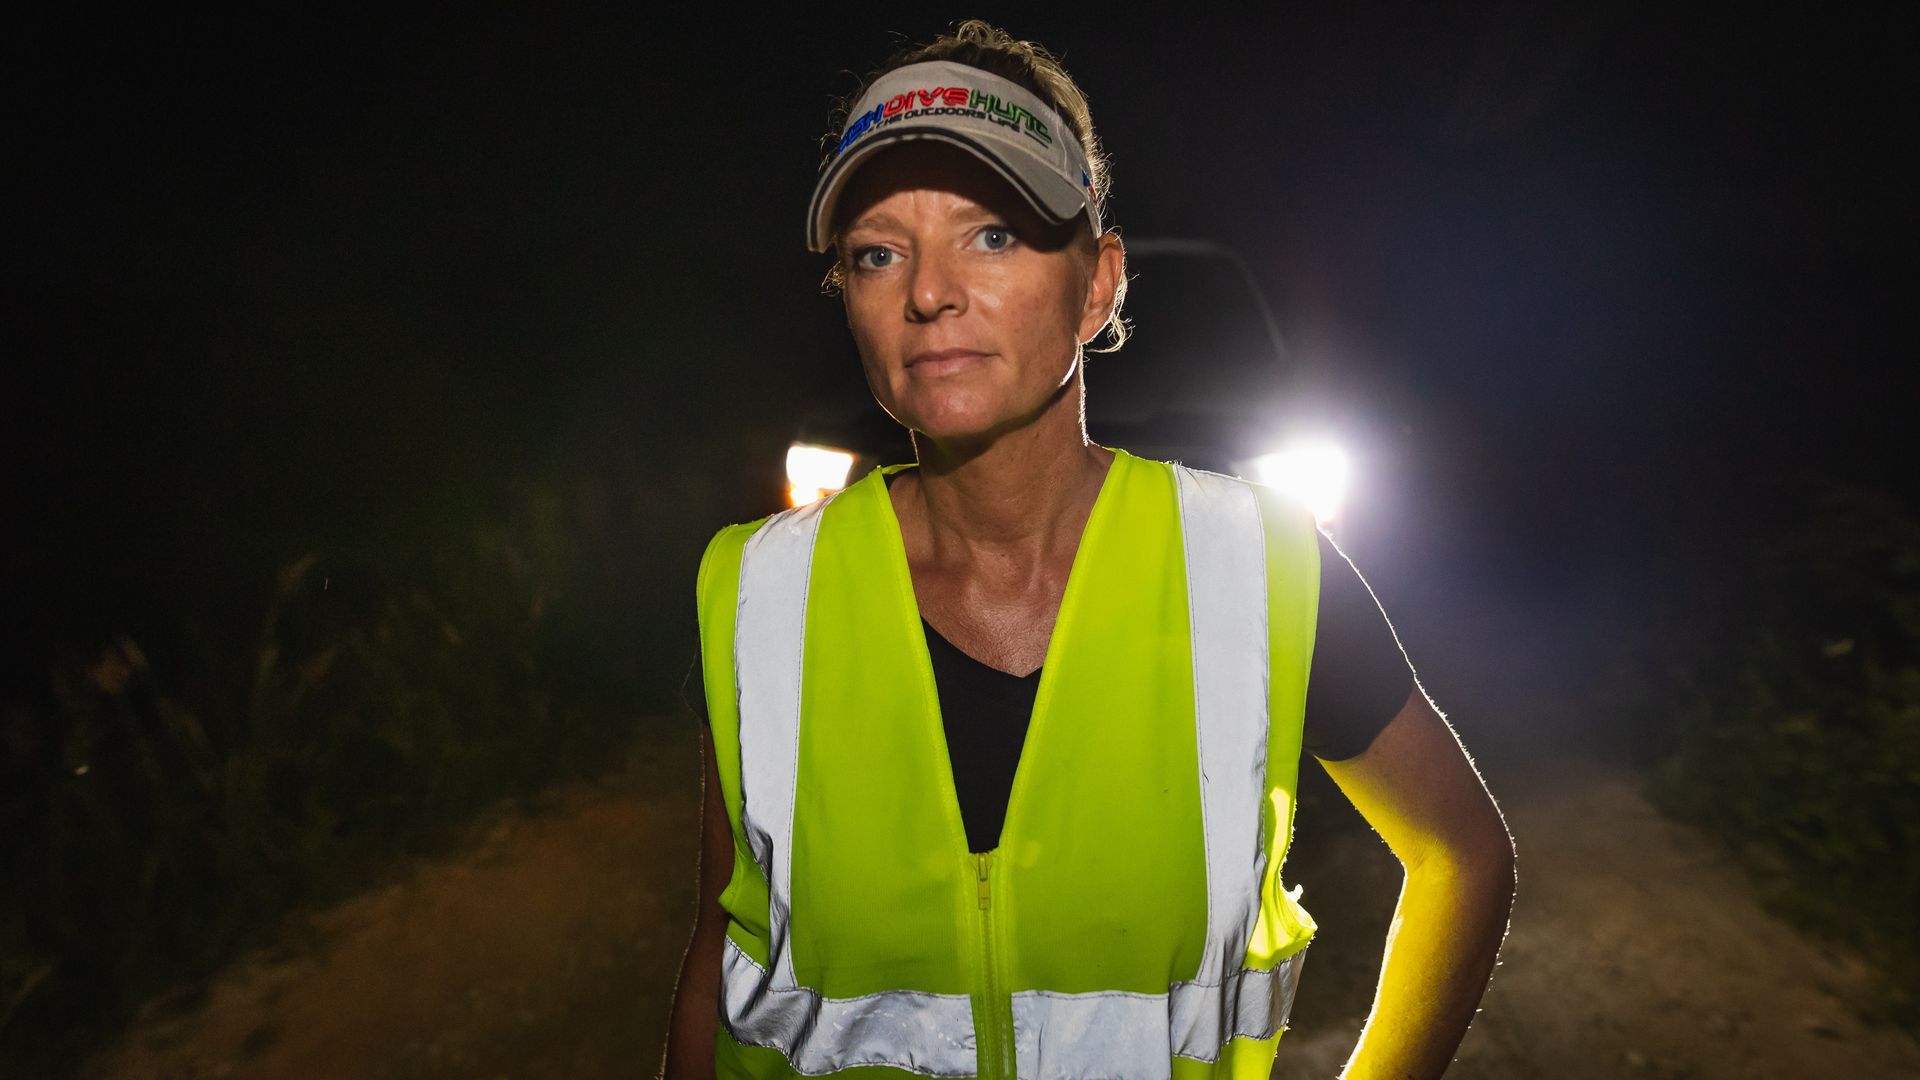 Amy Siewe looks at the camera in reflective gear, backlit by the lights of a pick-up truck.